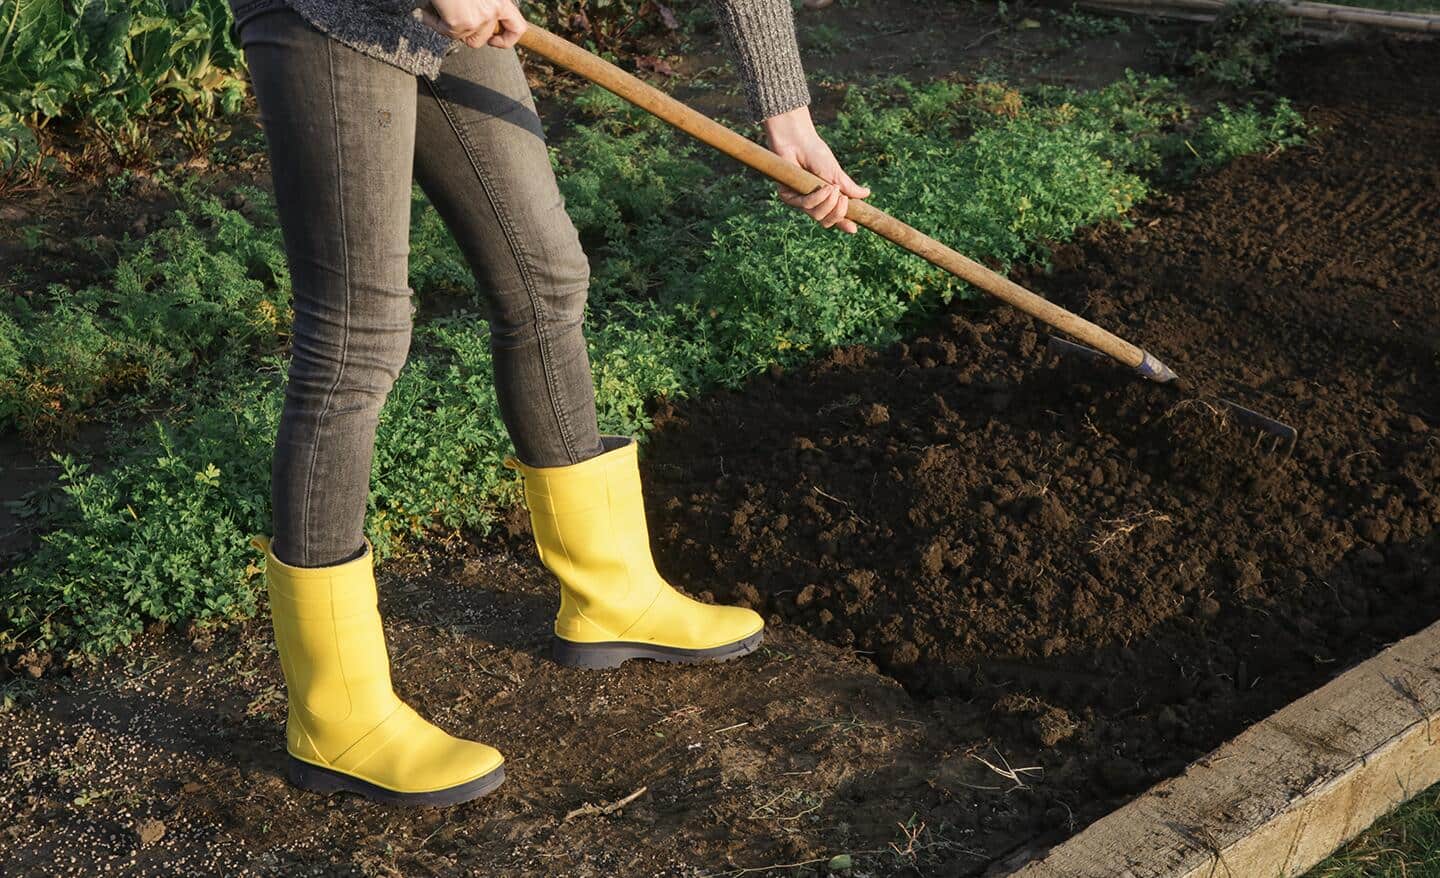 A person in yellow garden boots leveling soil in a garden plot.